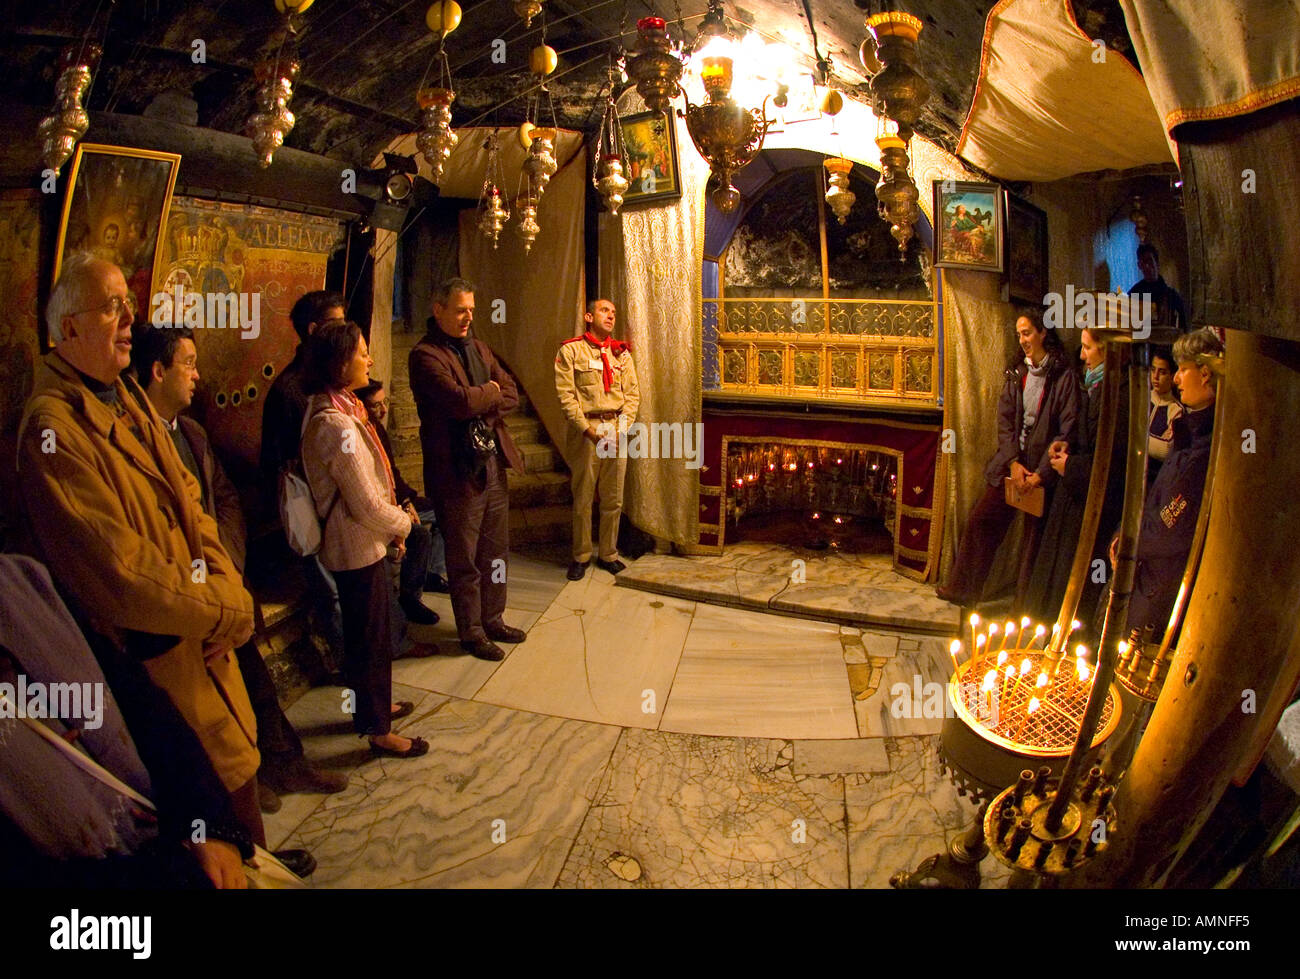 Palestinian Authority Bethlehem church of the Nativity grotto of Ste catherine groupe of pilgrims singing in front of the star at the spot where Jesus was born Stock Photo